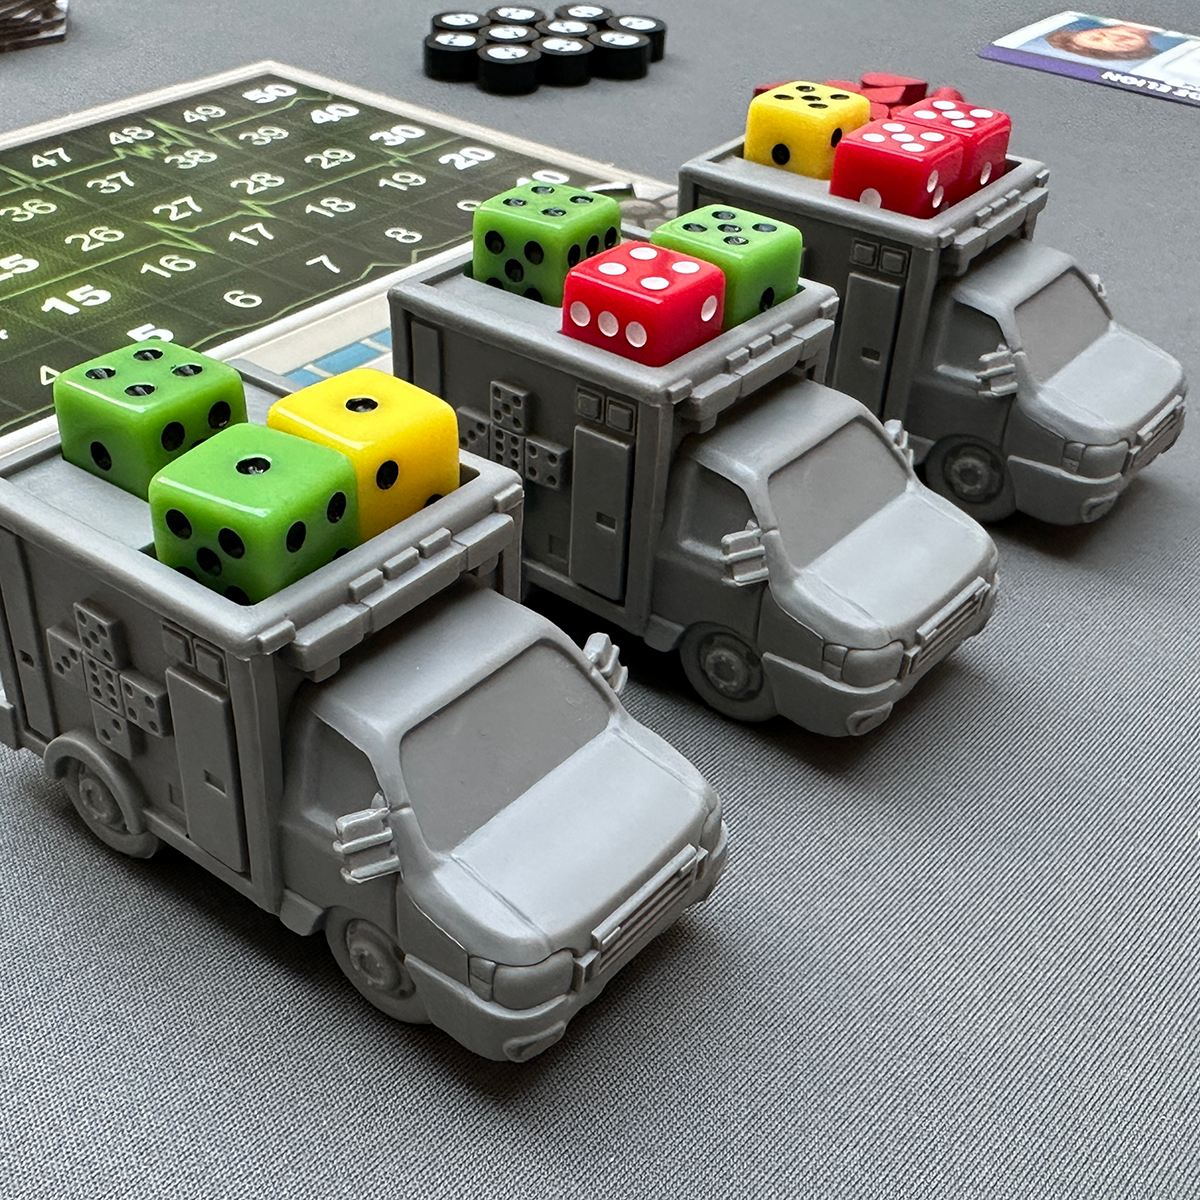 Dice Hospital Board Game Deluxe Ambulances